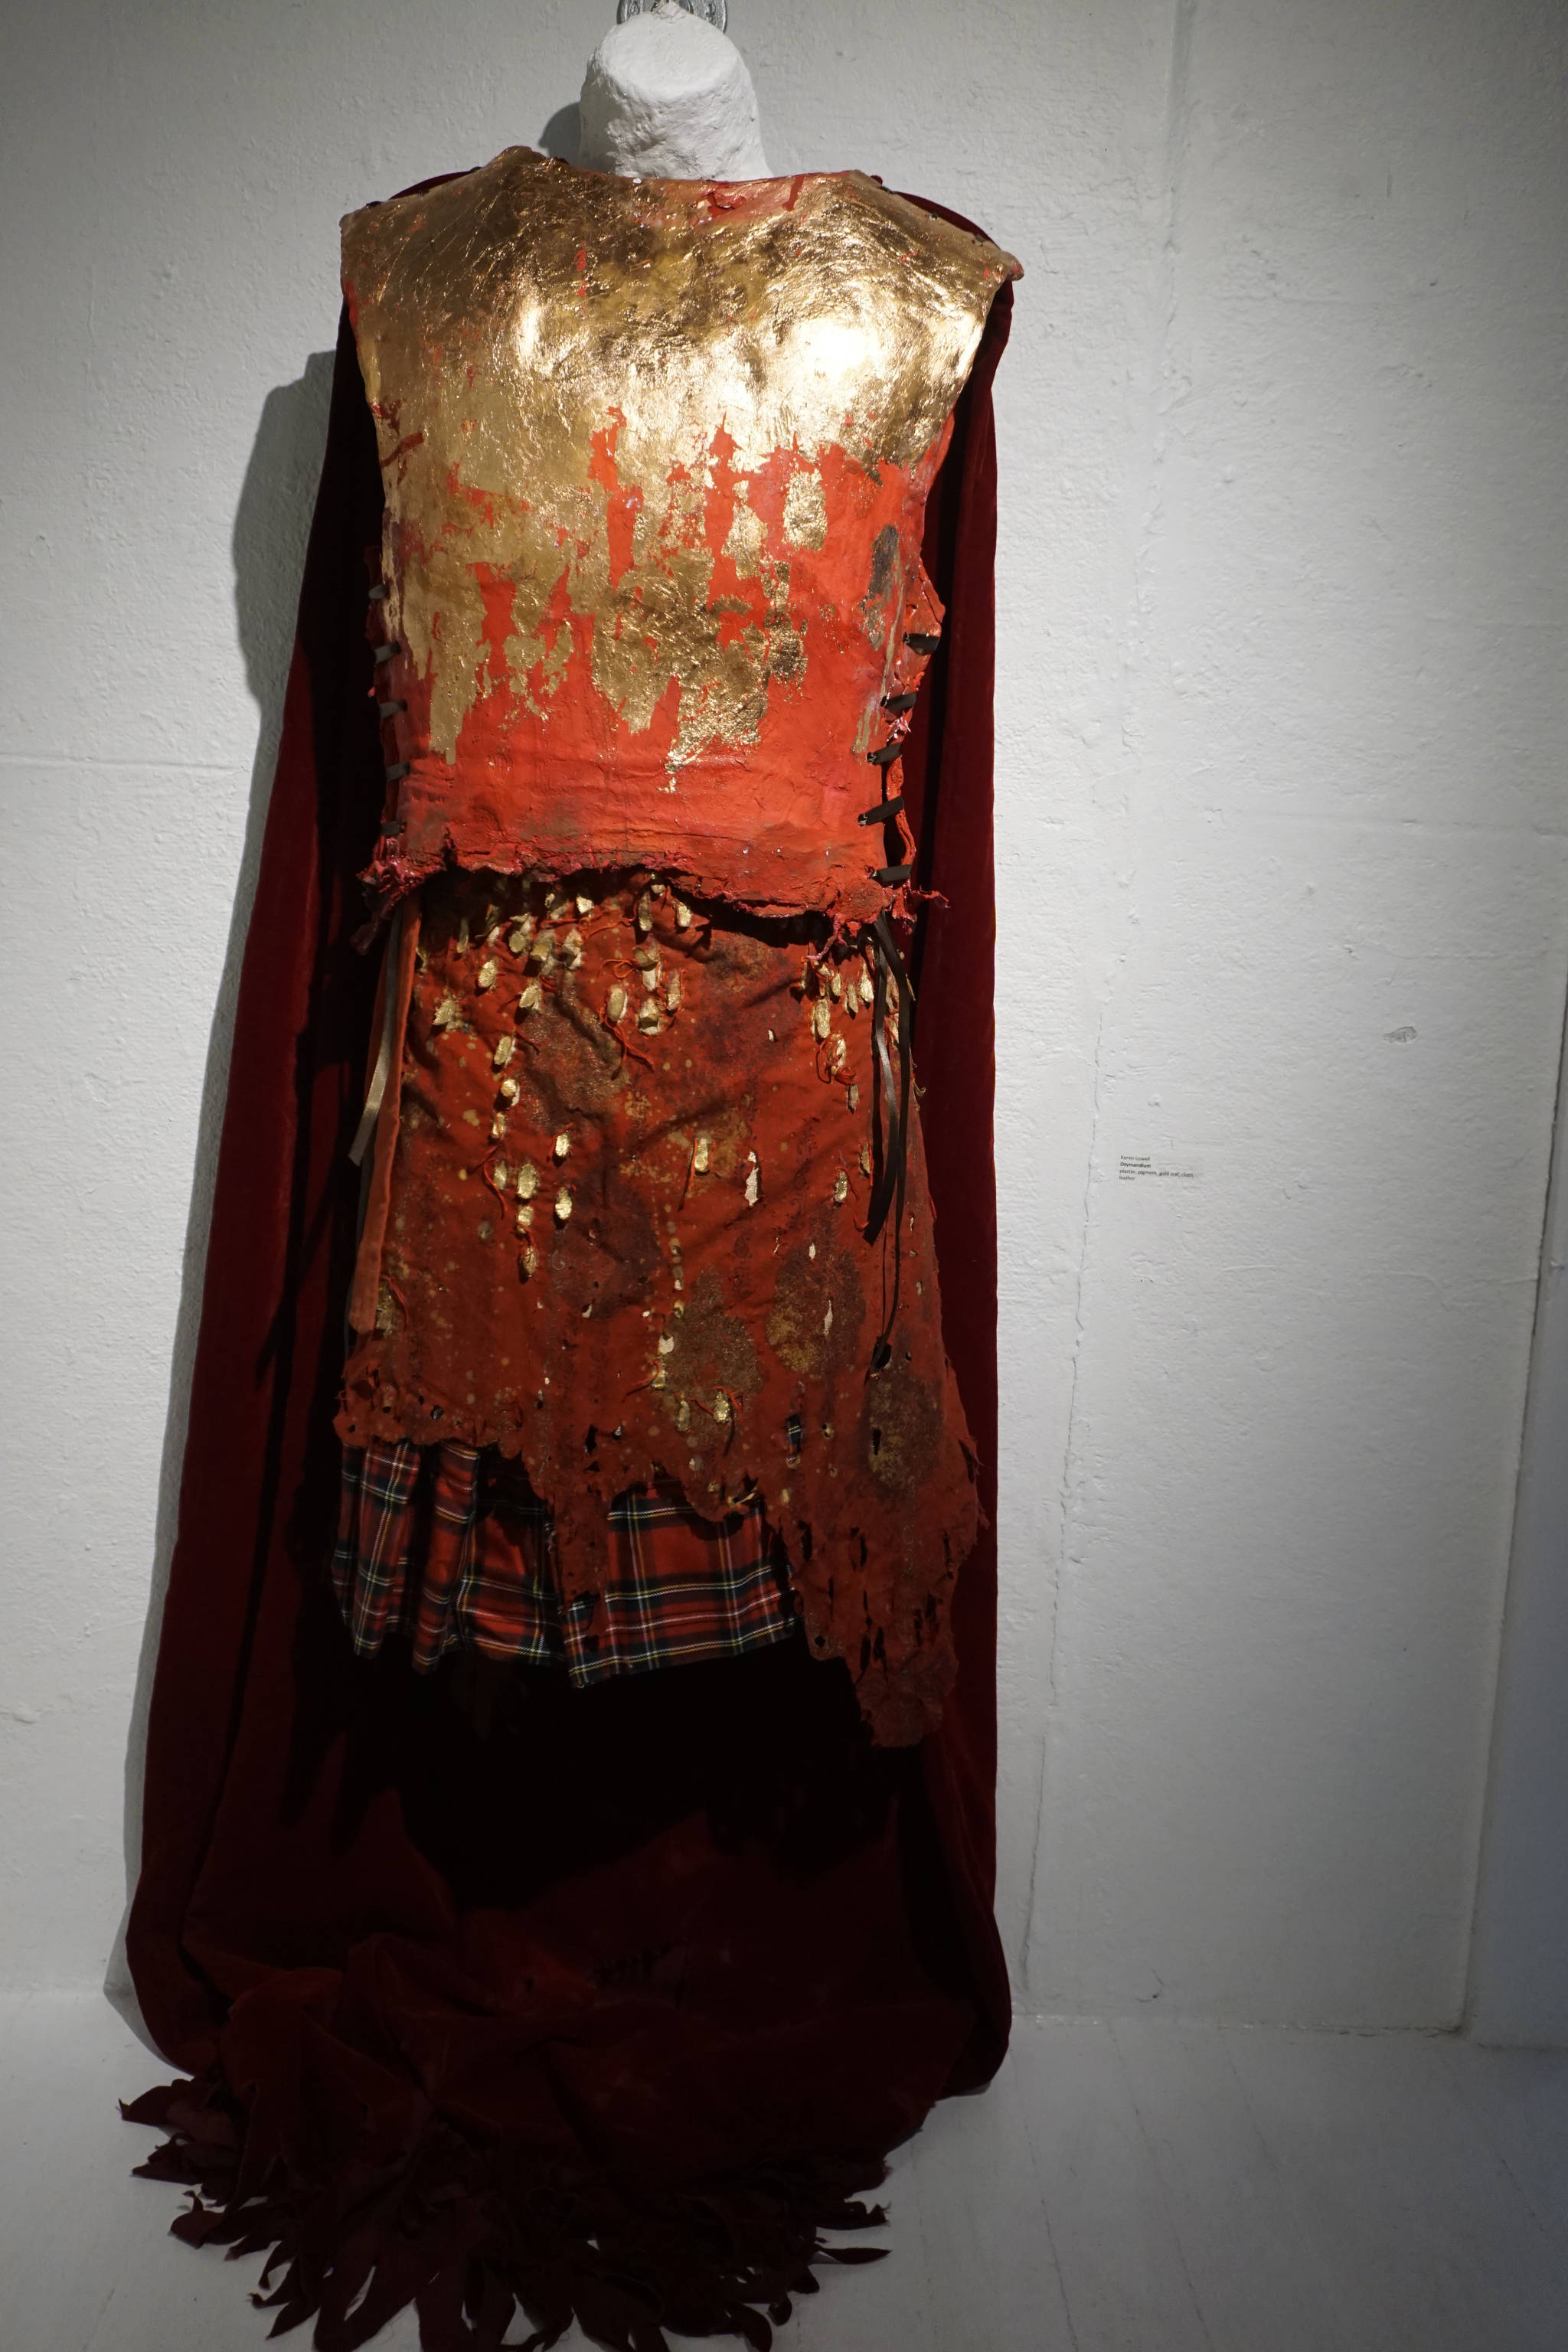 Keren Lowell’s “Ozymandias,” part of her show at Bunnell Street Arts Center as seen at the First Friday, Oct. 6, 2018, opening in Homer, Alaska. The title refers to Percy Bysshe Shelley’s poem,”Ozymandias.” Many of Lowell’s garments have poetic references. (Photo by Michael Armstrong/Homer News)